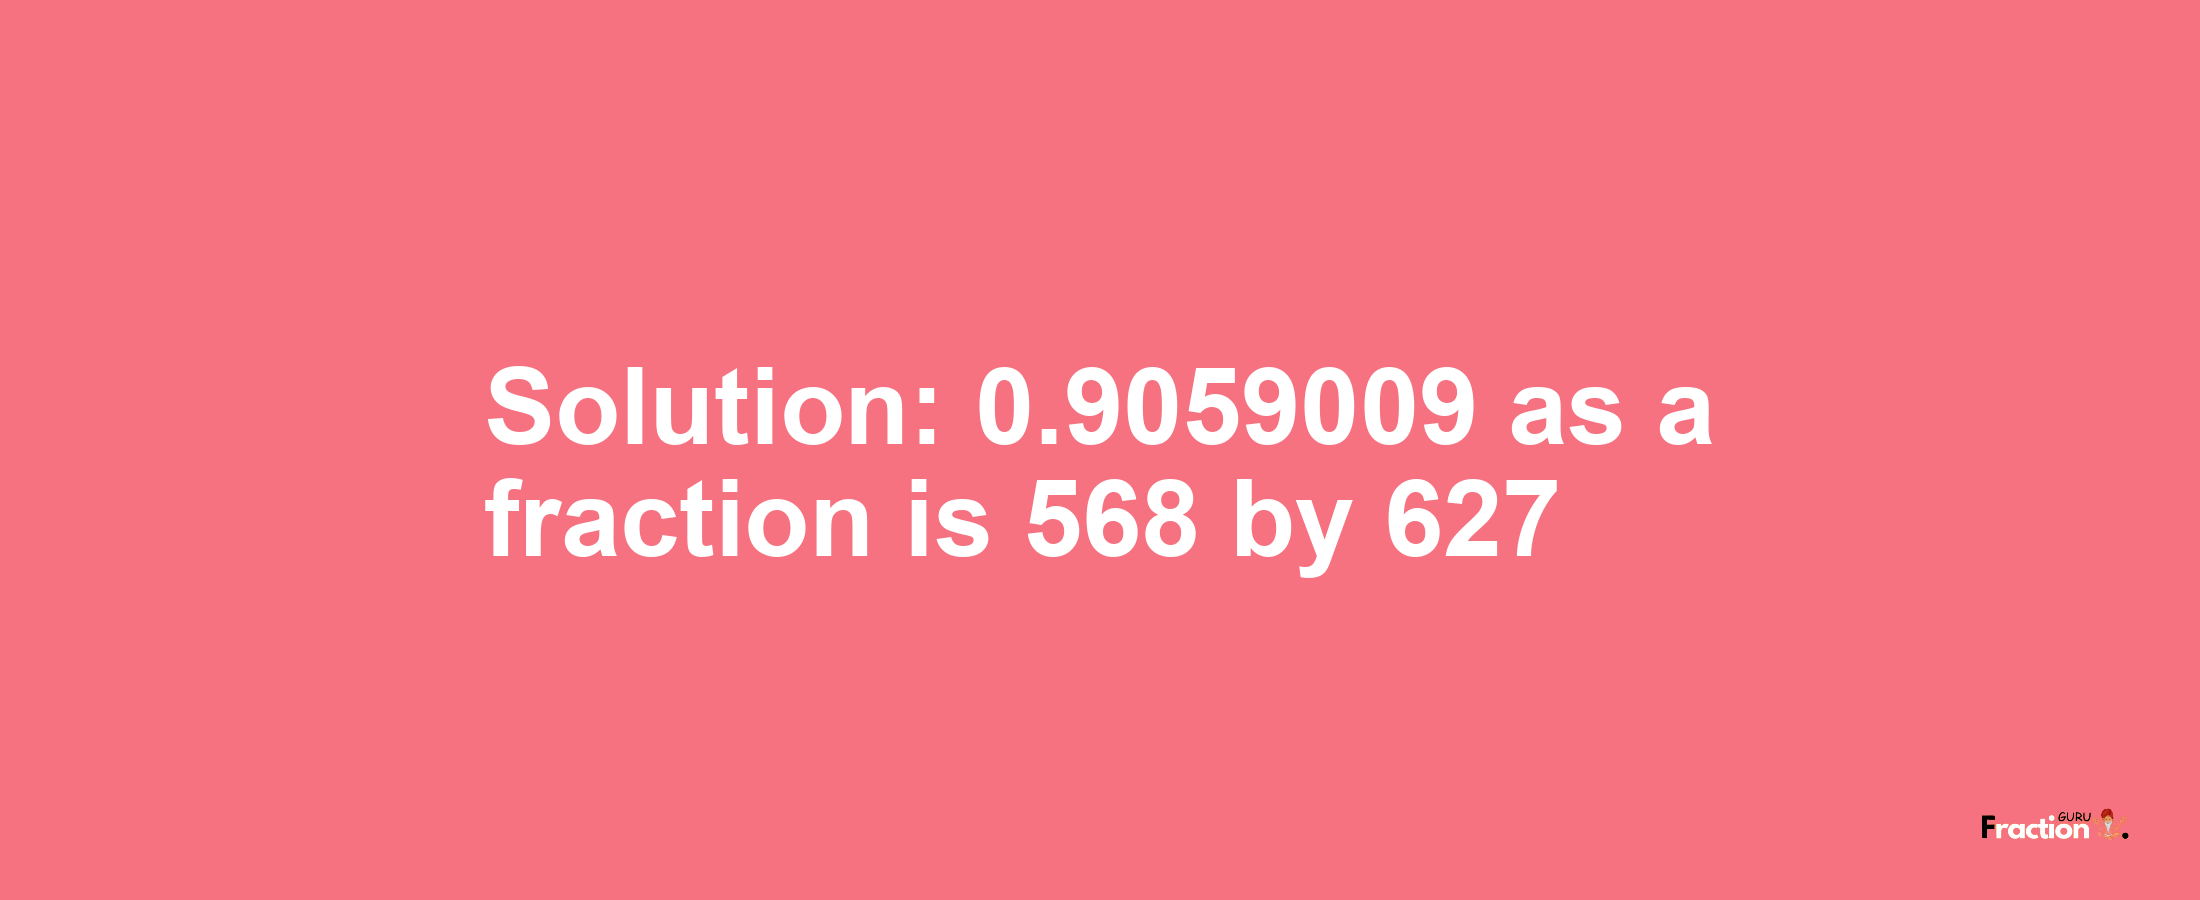 Solution:0.9059009 as a fraction is 568/627